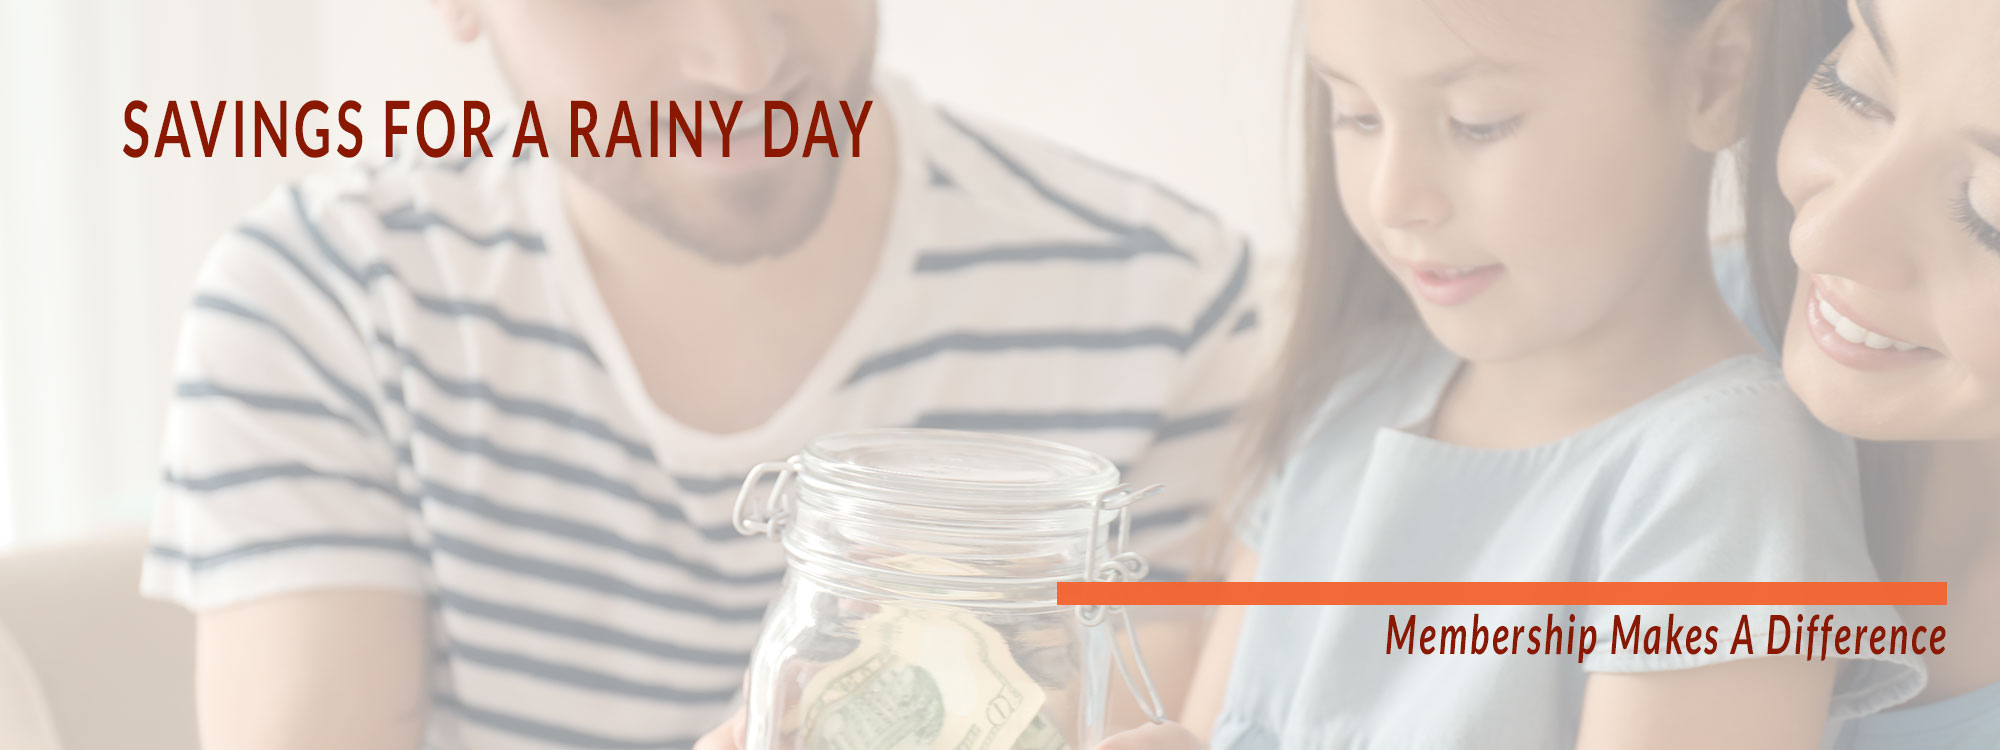 Savings for a rainy day. Membership Makes a Difference.